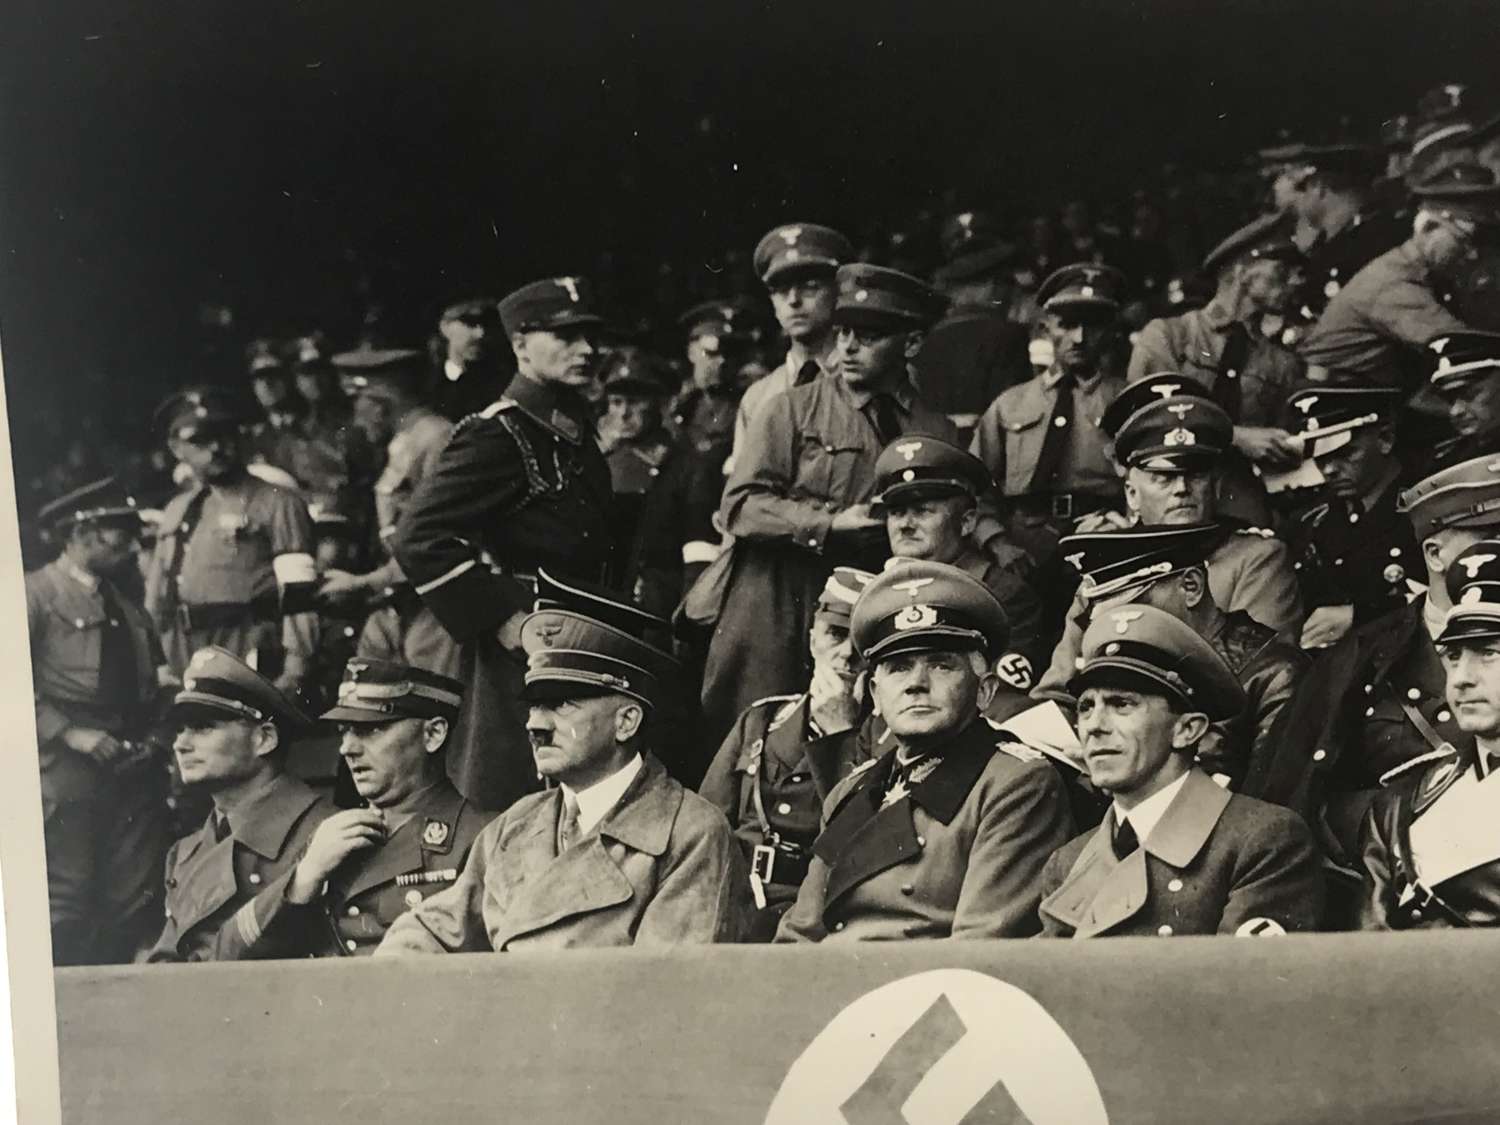 A German press photo of Hitler and Goebbels 1937